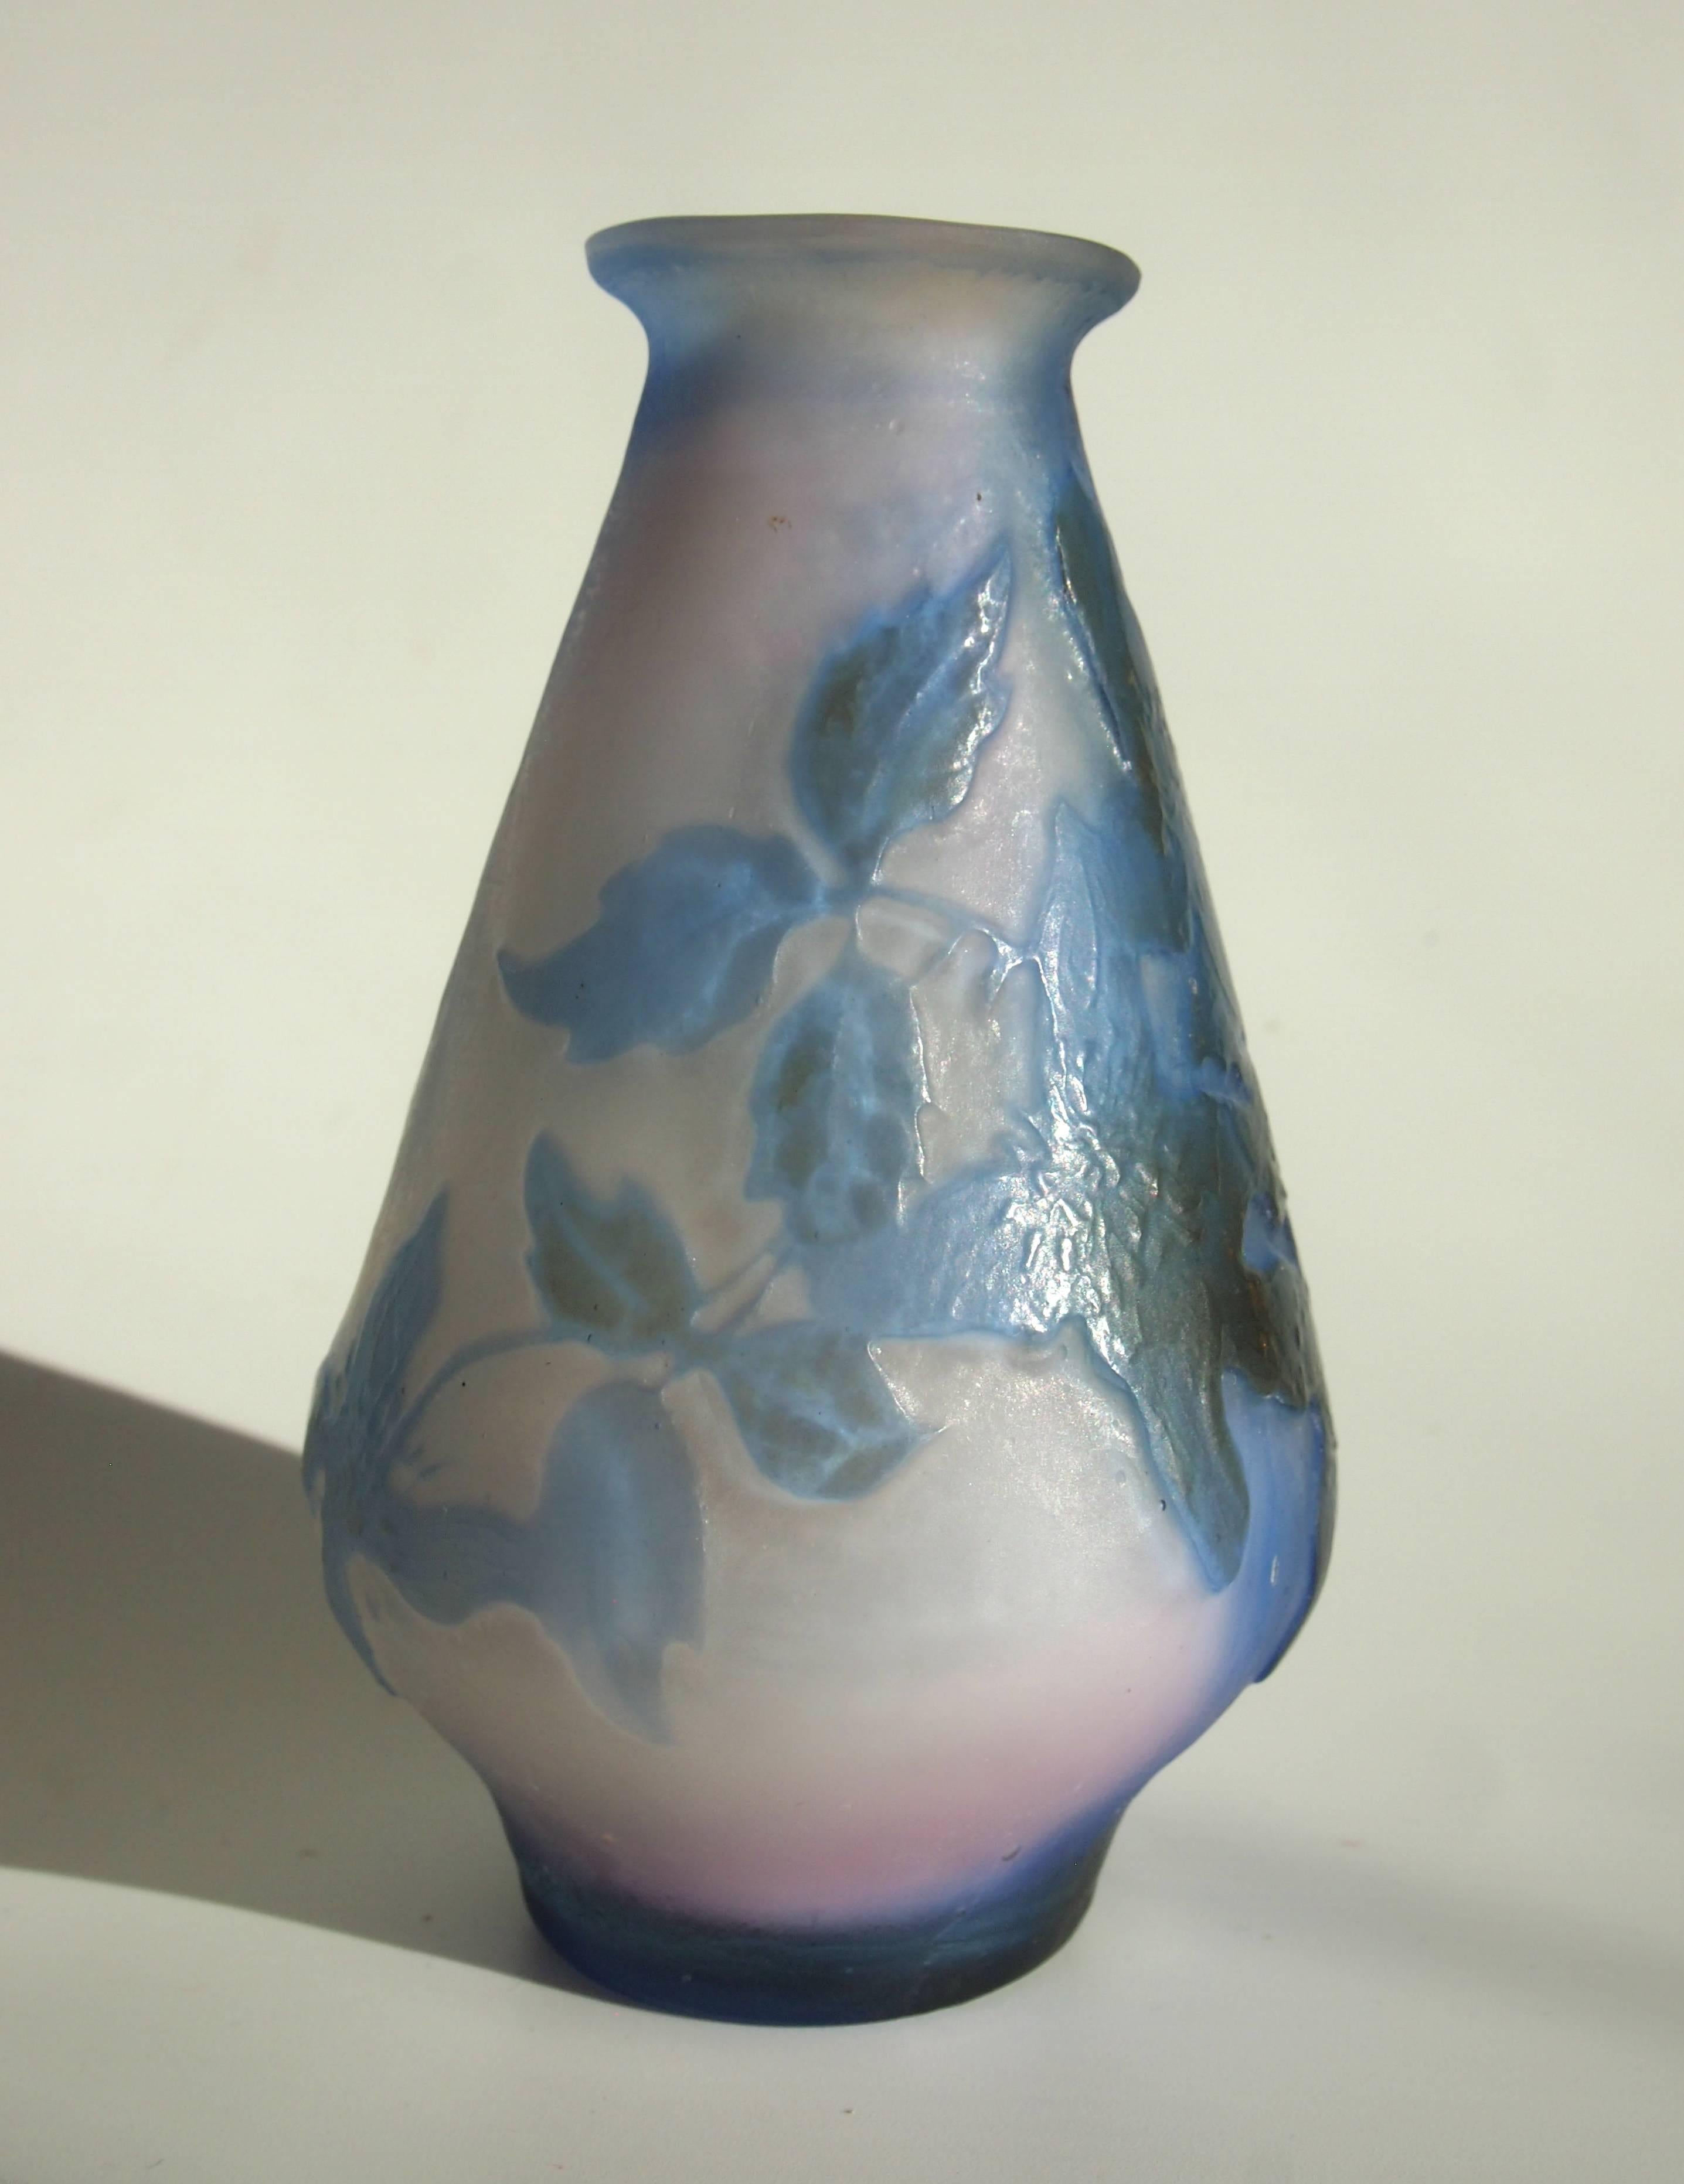 Early 20th Century French Art Nouveau Emile Galle Fire Polished Cameo Glass Vase circa 1900 For Sale